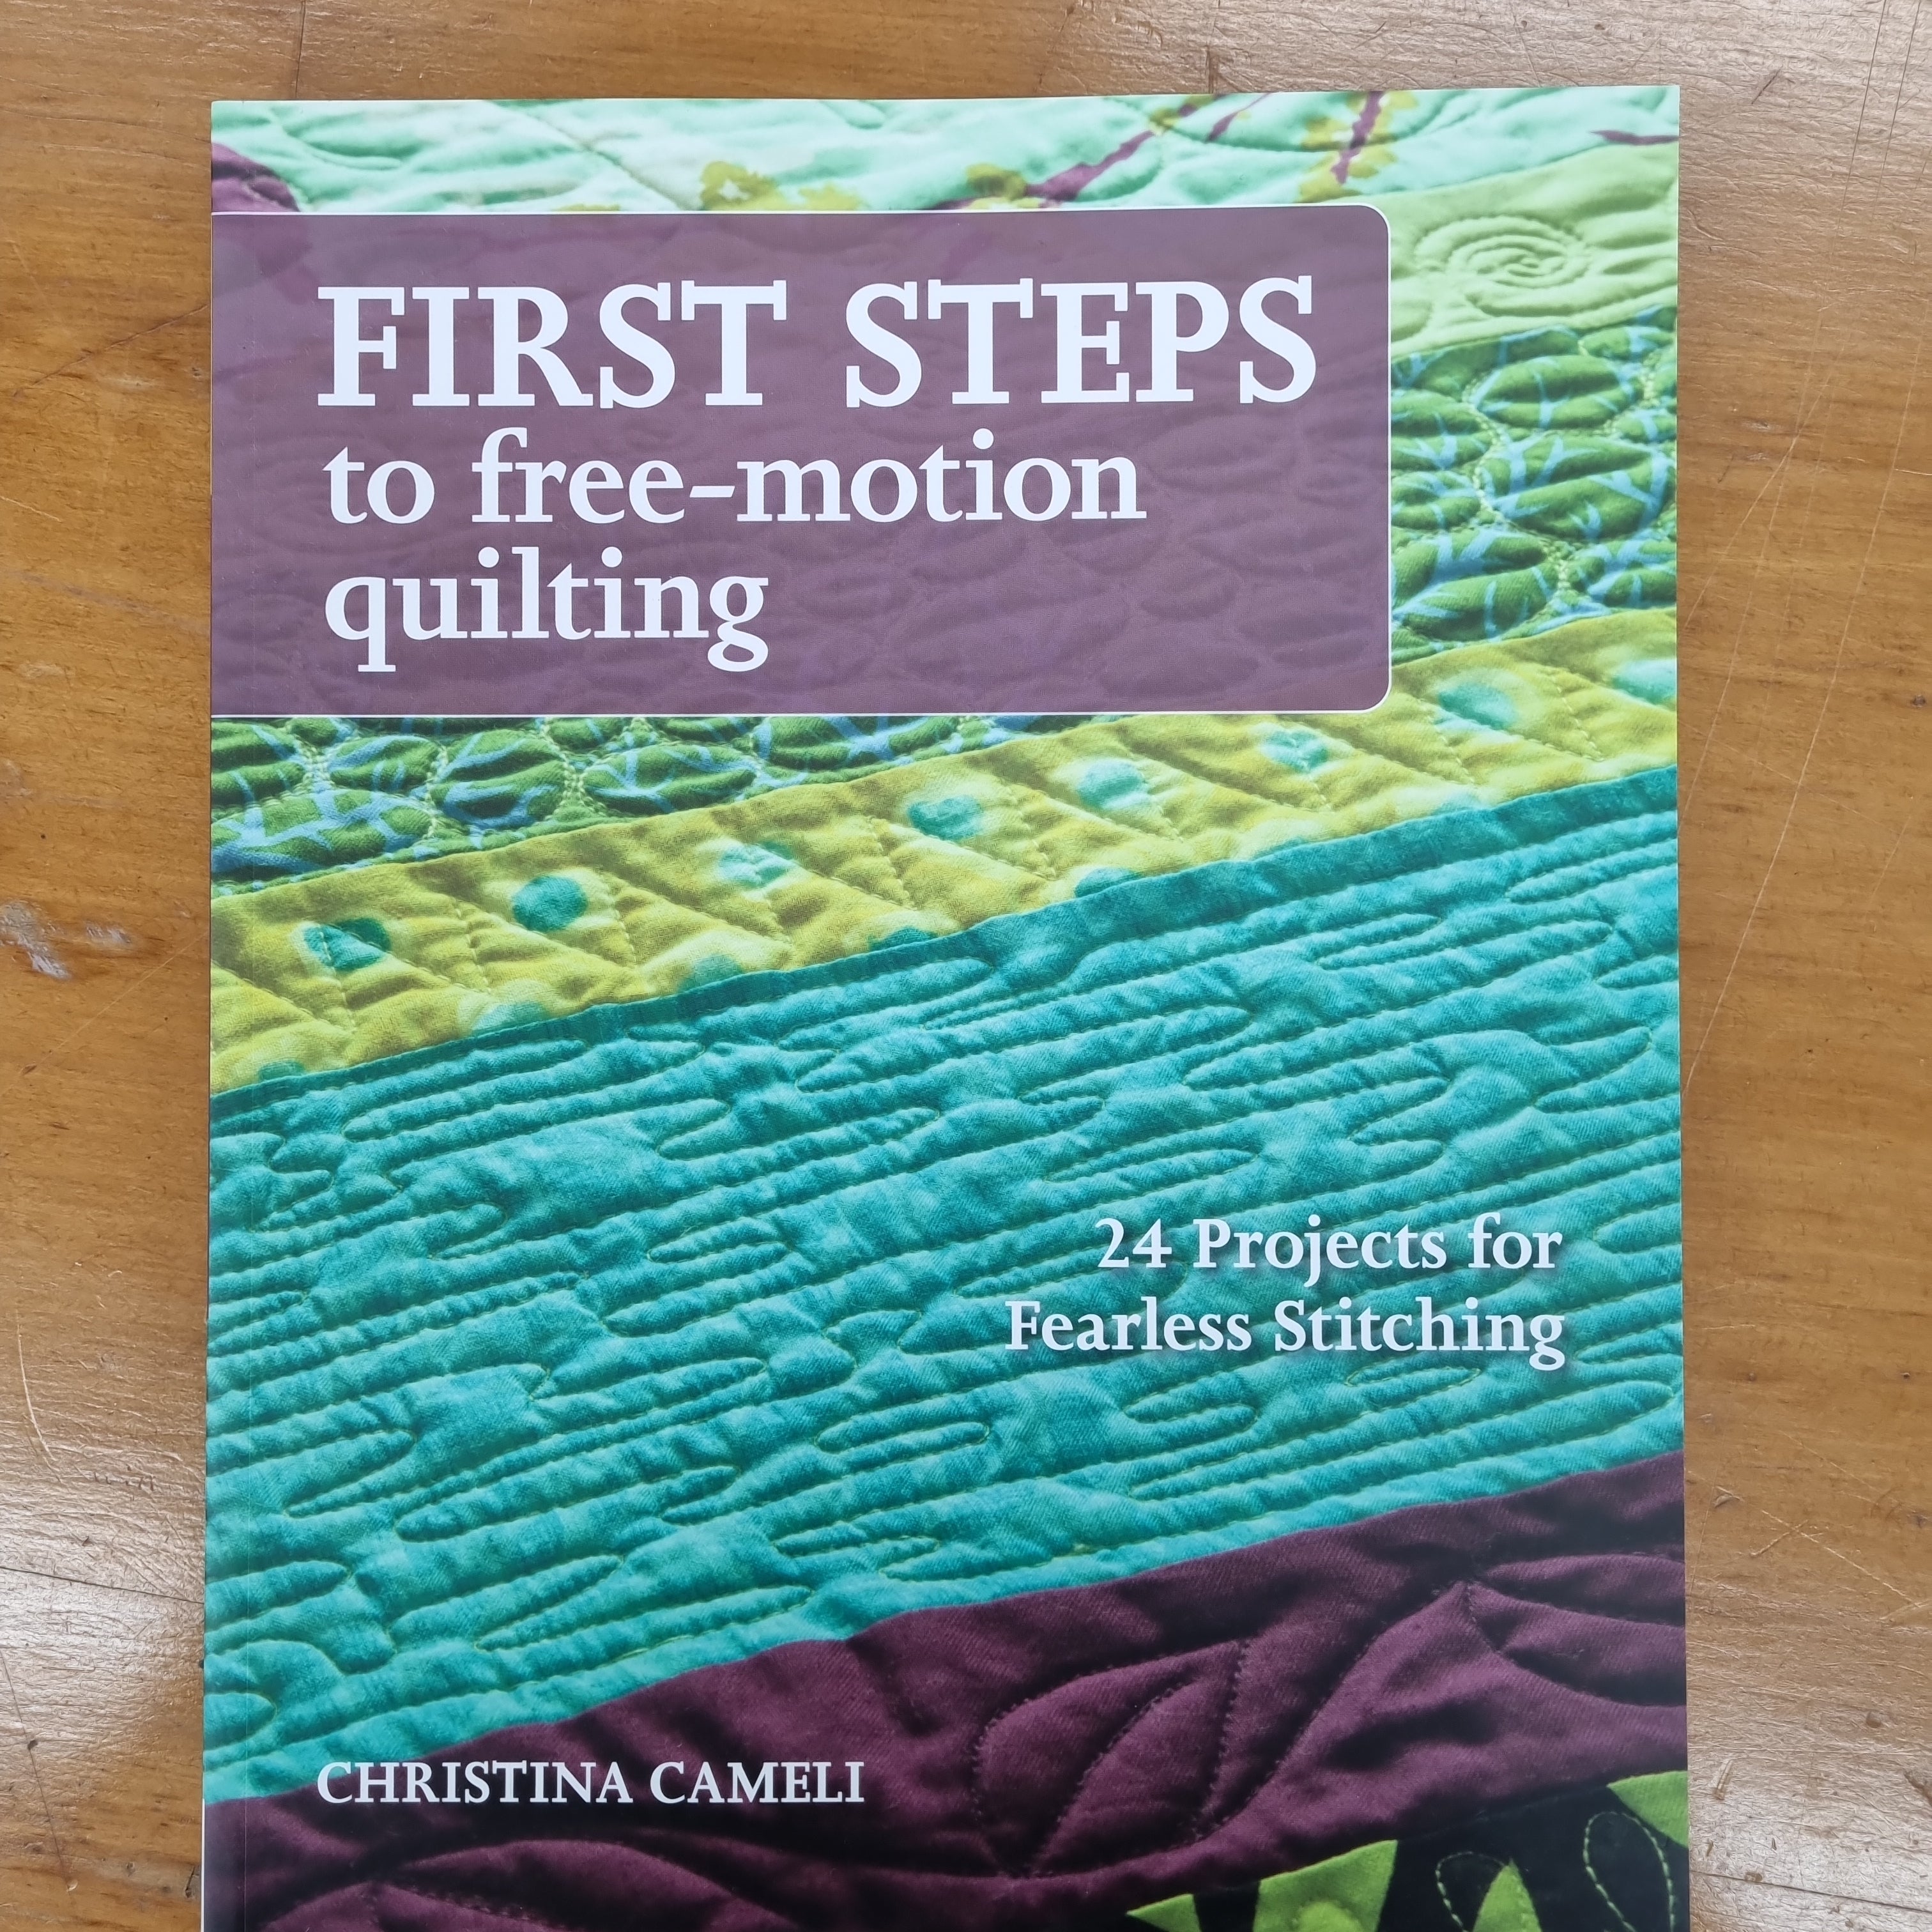 First Steps to free-motion Quilting